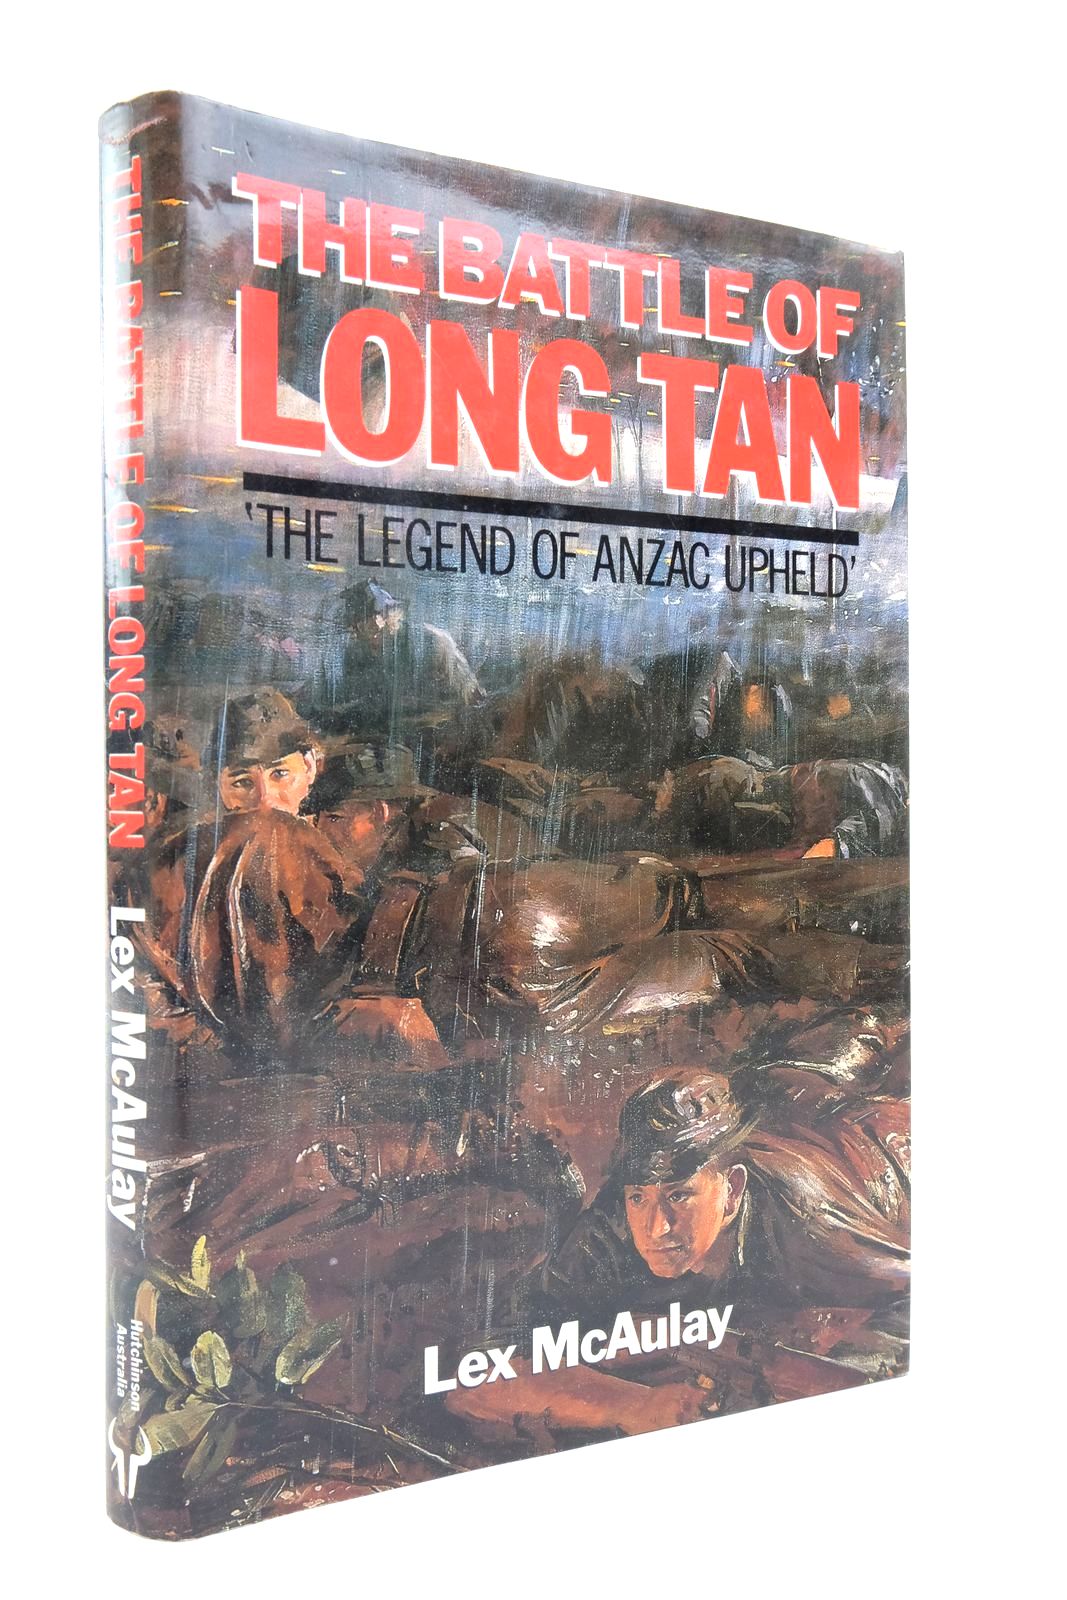 Photo of THE BATTLE OF LONG TAN written by McAulay, Lex published by Hutchinson Of Australia (STOCK CODE: 2138545)  for sale by Stella & Rose's Books